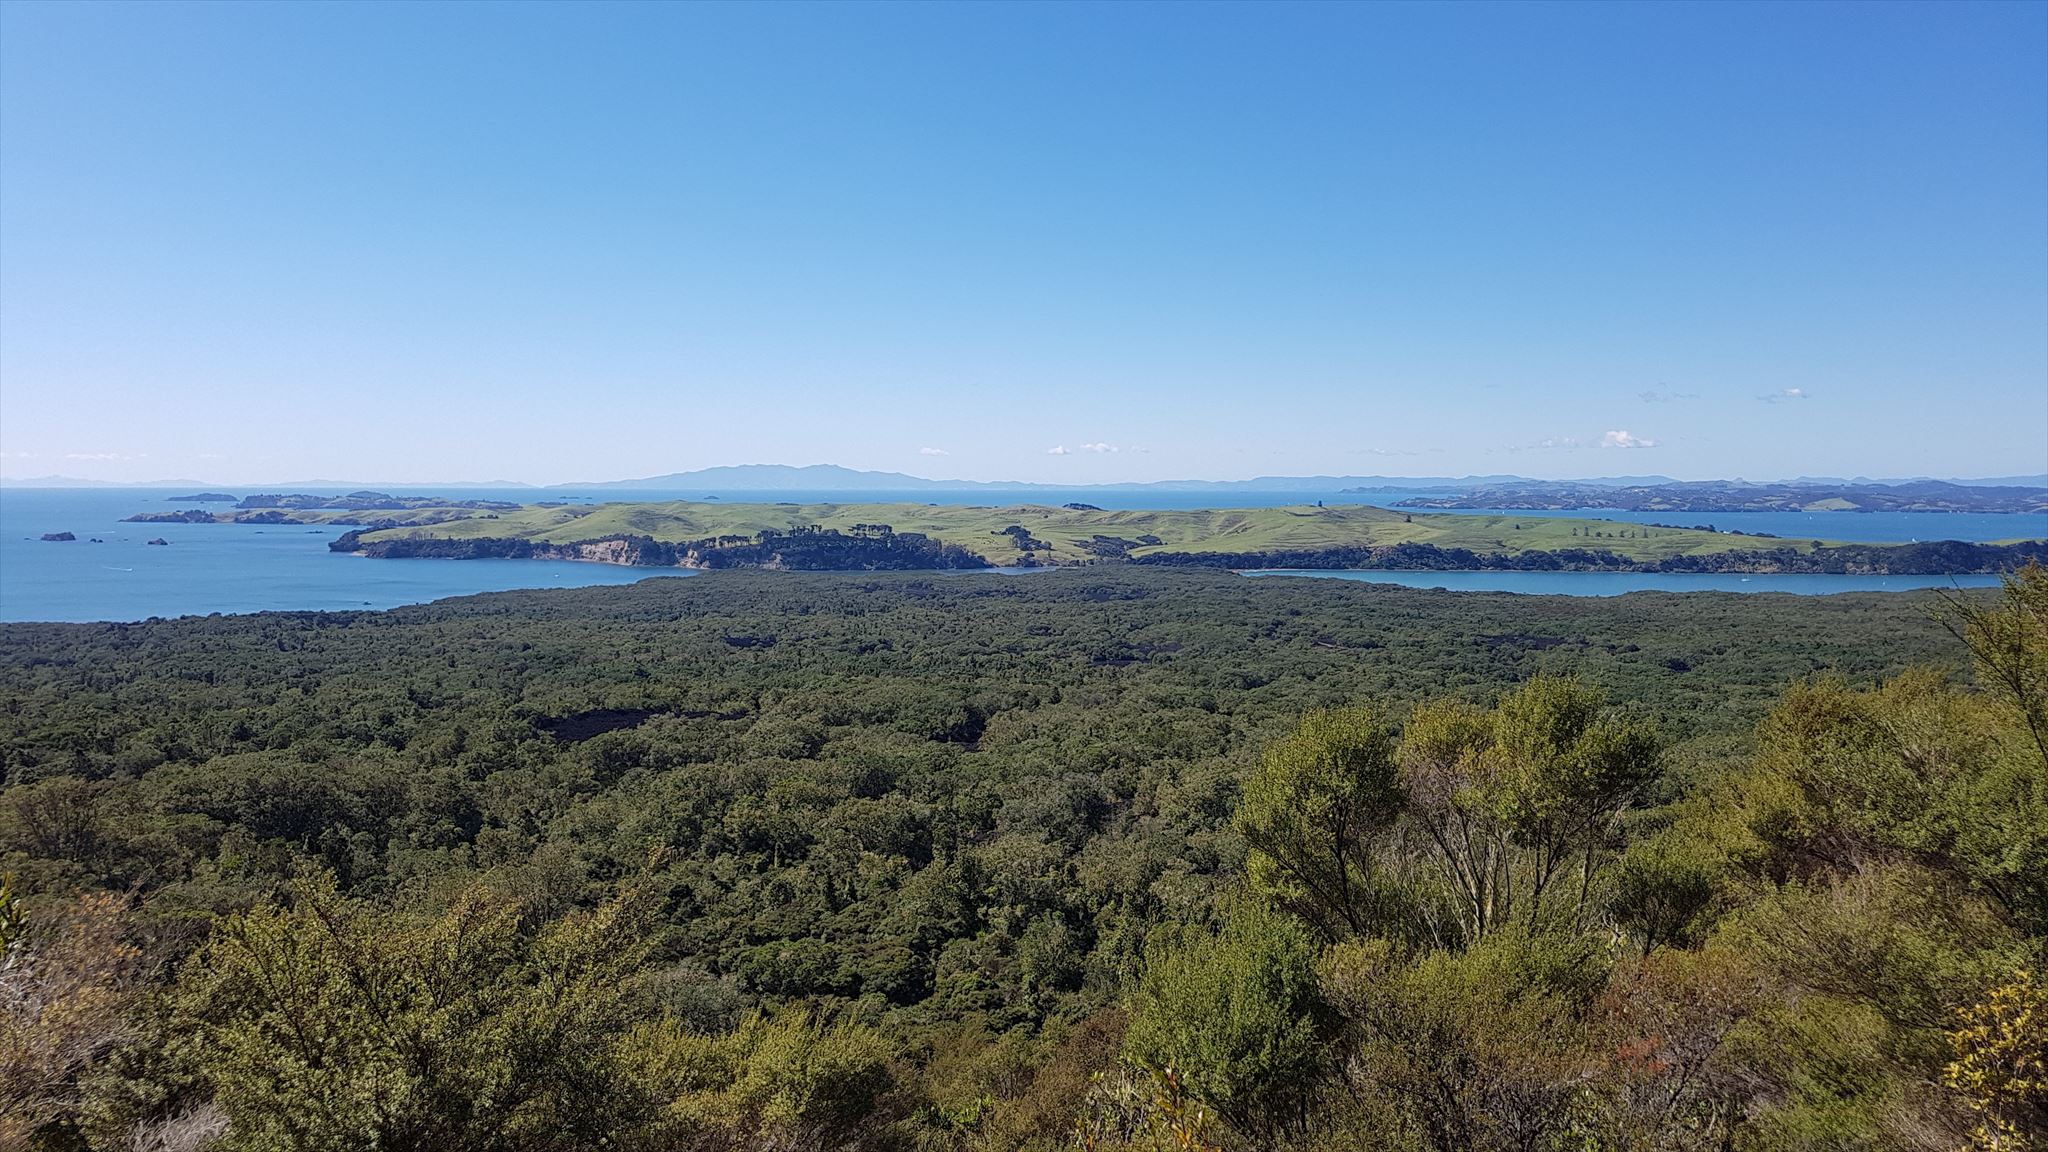 A view of Rangitoto Island from the peak of the volcanic island.